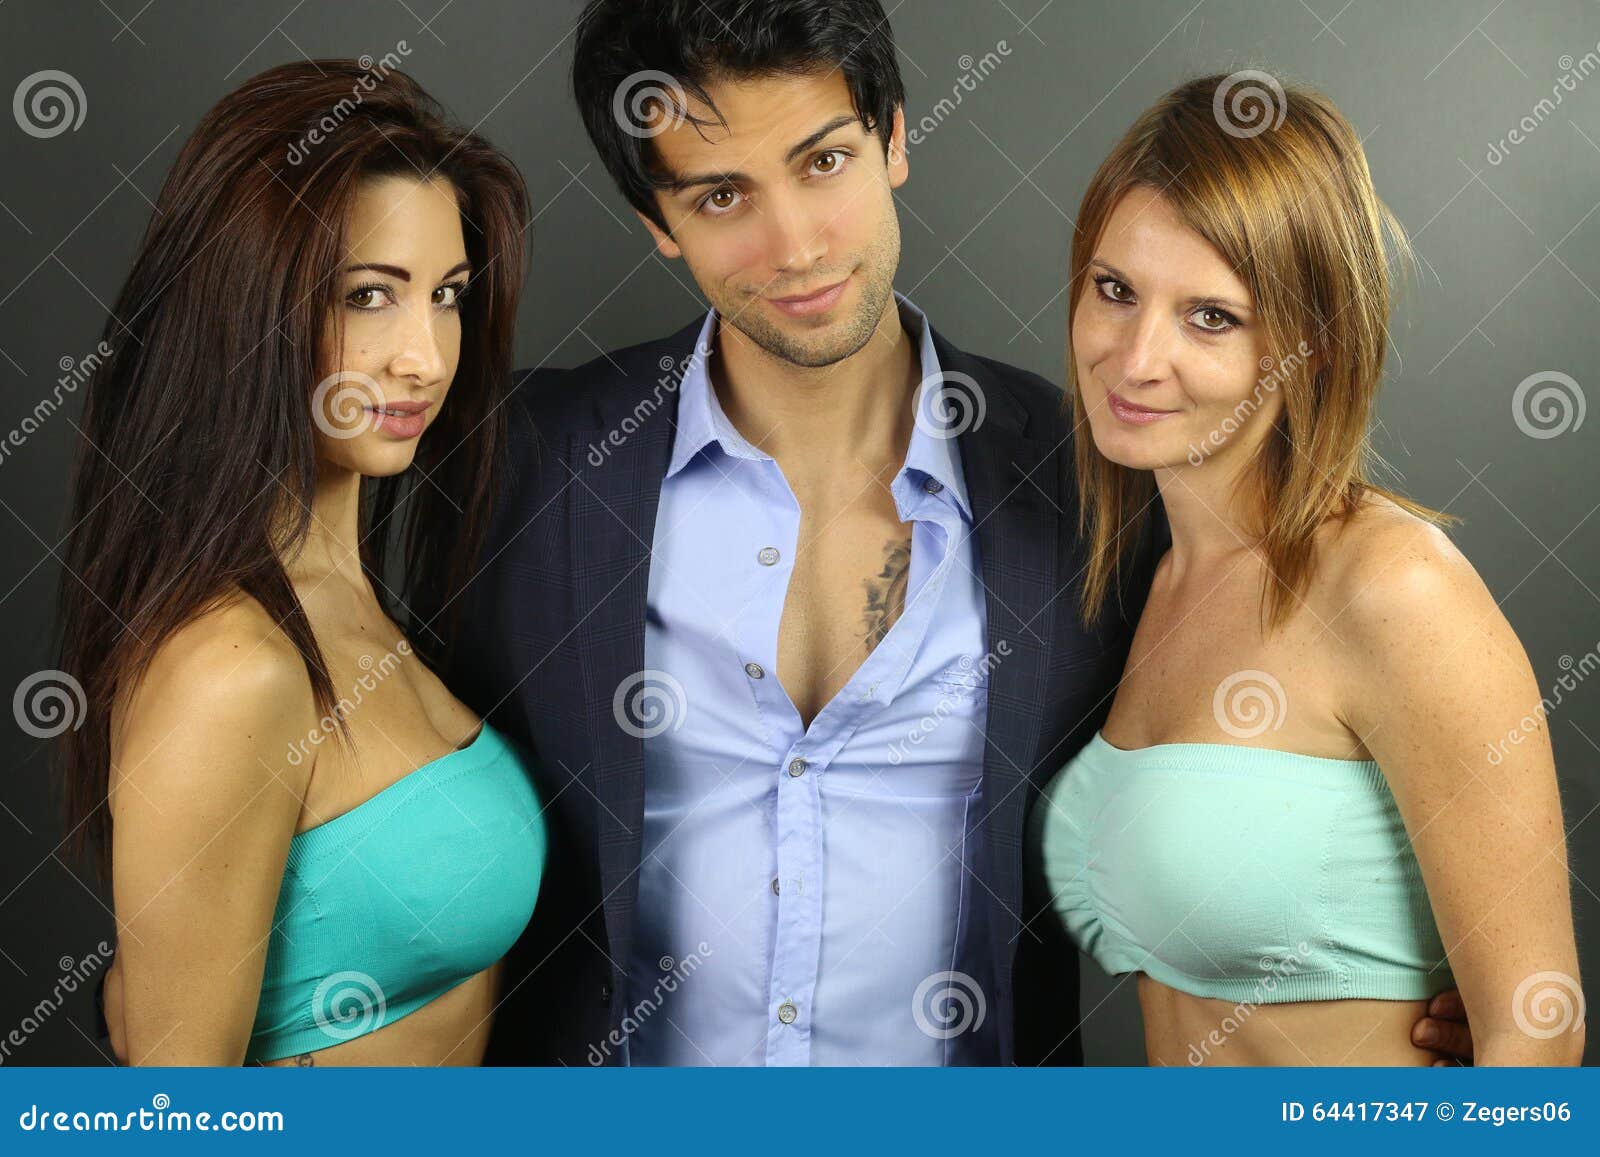 New threesome. Threesome dating. Swingers dating. Threesome men.